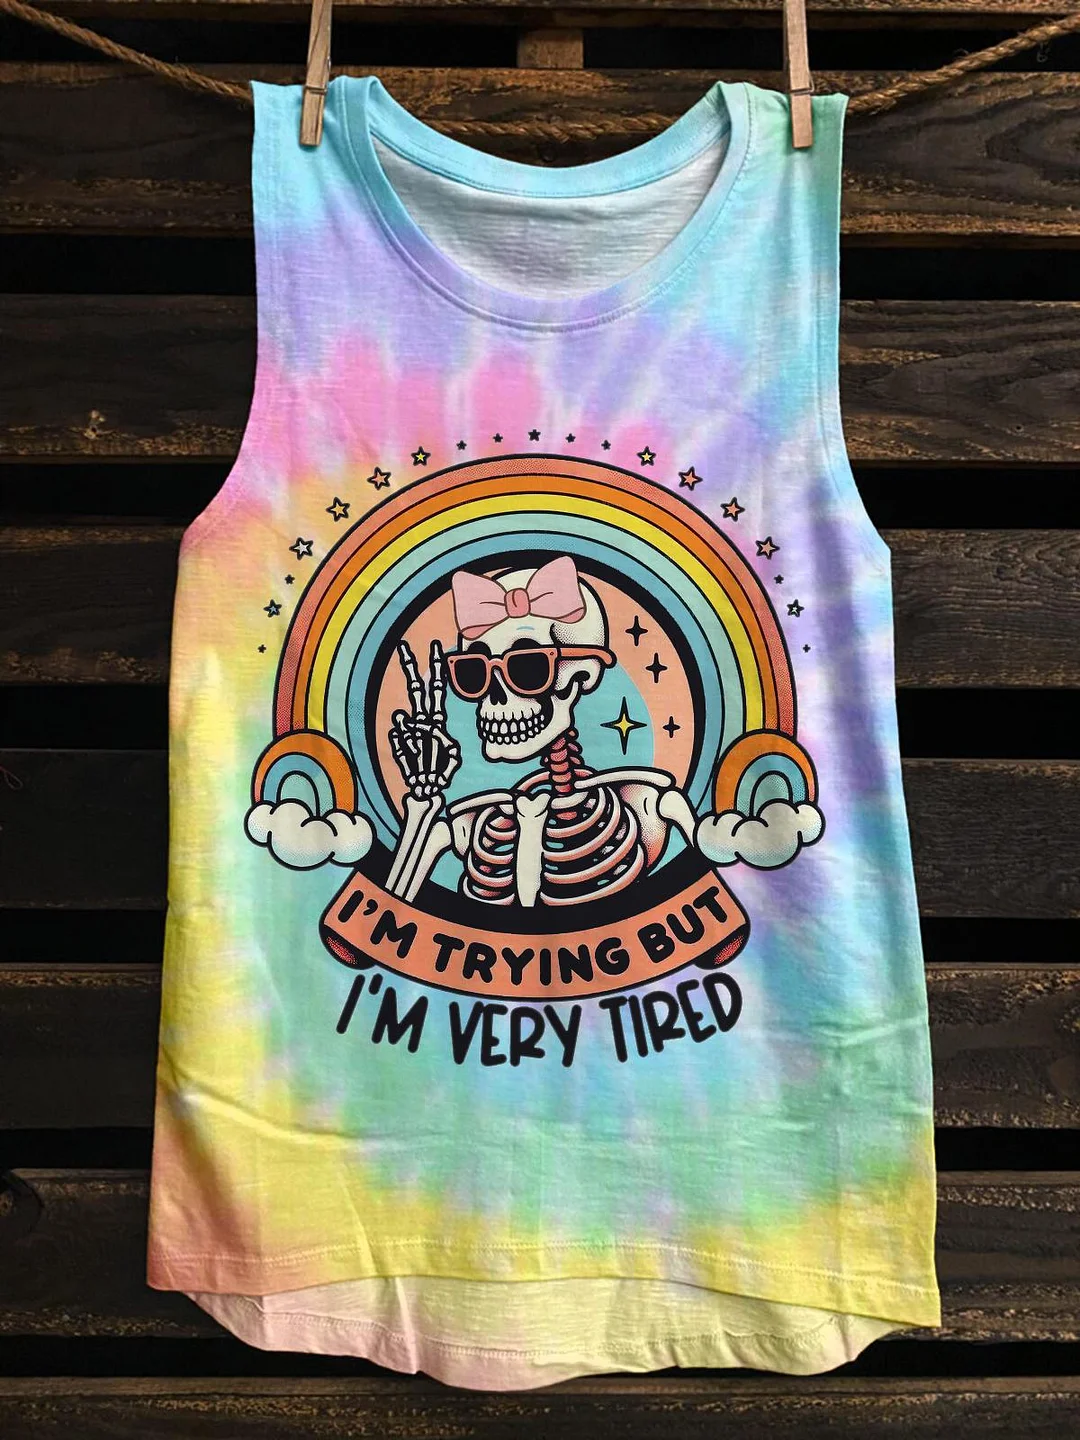 I'm Trying But I'm Very Tired Printed Women's Vest